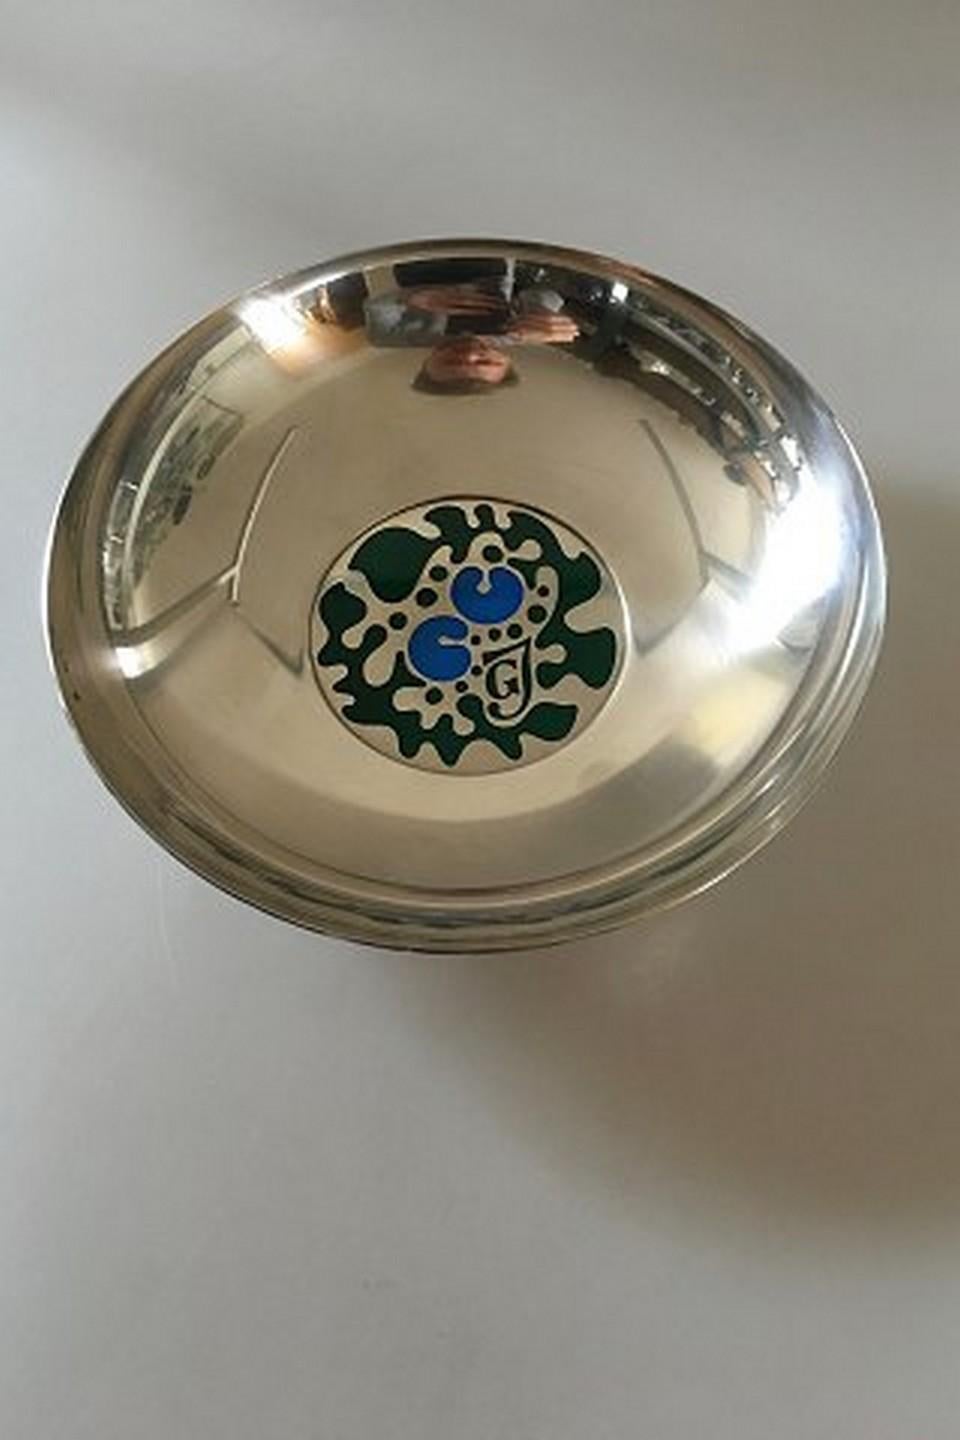 Georg Jensen sterling silver bowl with enamel.

Designed by Henning Koppel in 1979 for Georg Jensen 75th Jubilee.

This one is 98 out of 200 made.
Measures: 19 cm diameter (7 31/64